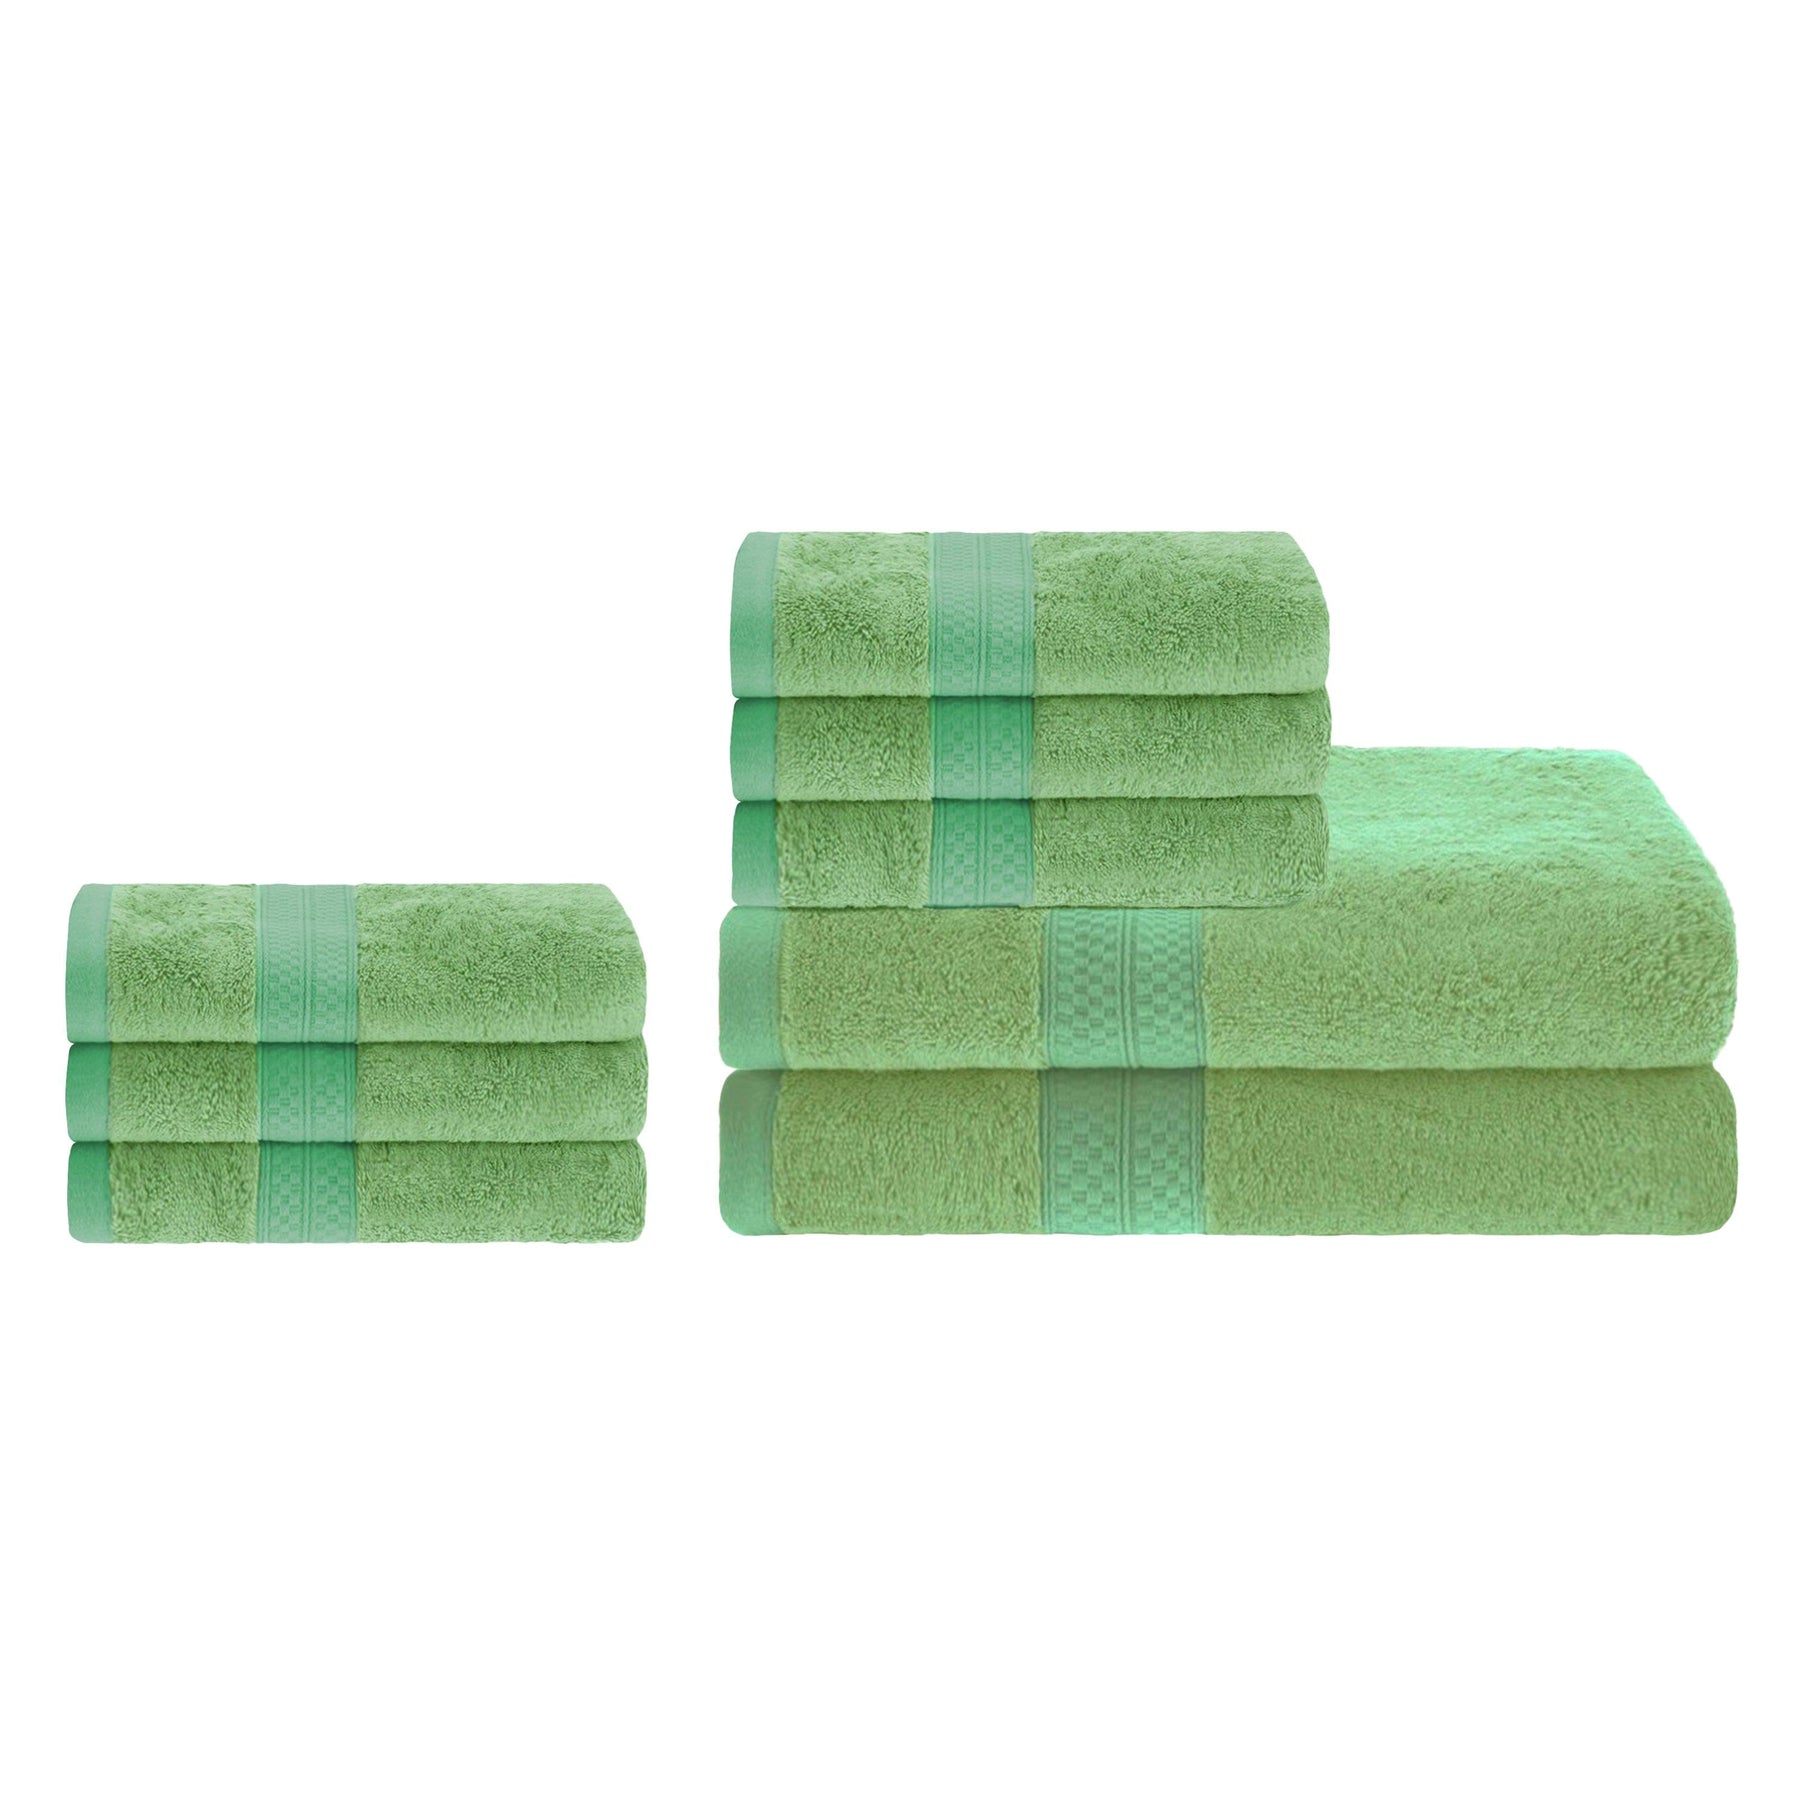 Abcelit Promotion!cotton Towels Soft Ultra Towels Hand Bath Thick Towels Home Textile Bathroom Accessories,Light Green